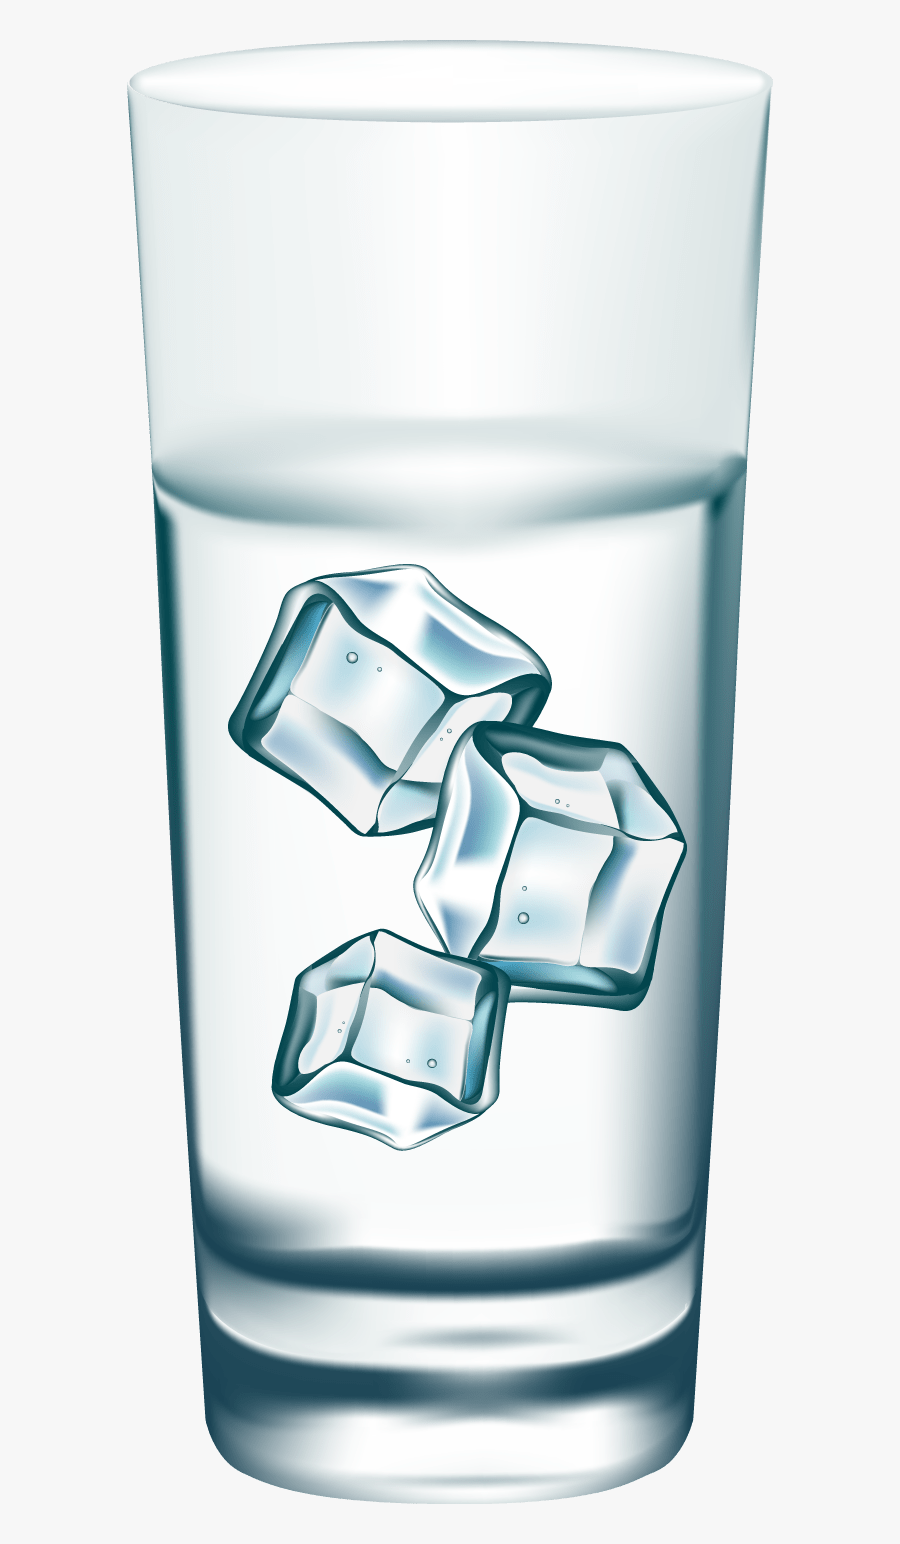 Thumb Image - Water Glass Clipart, Transparent Clipart